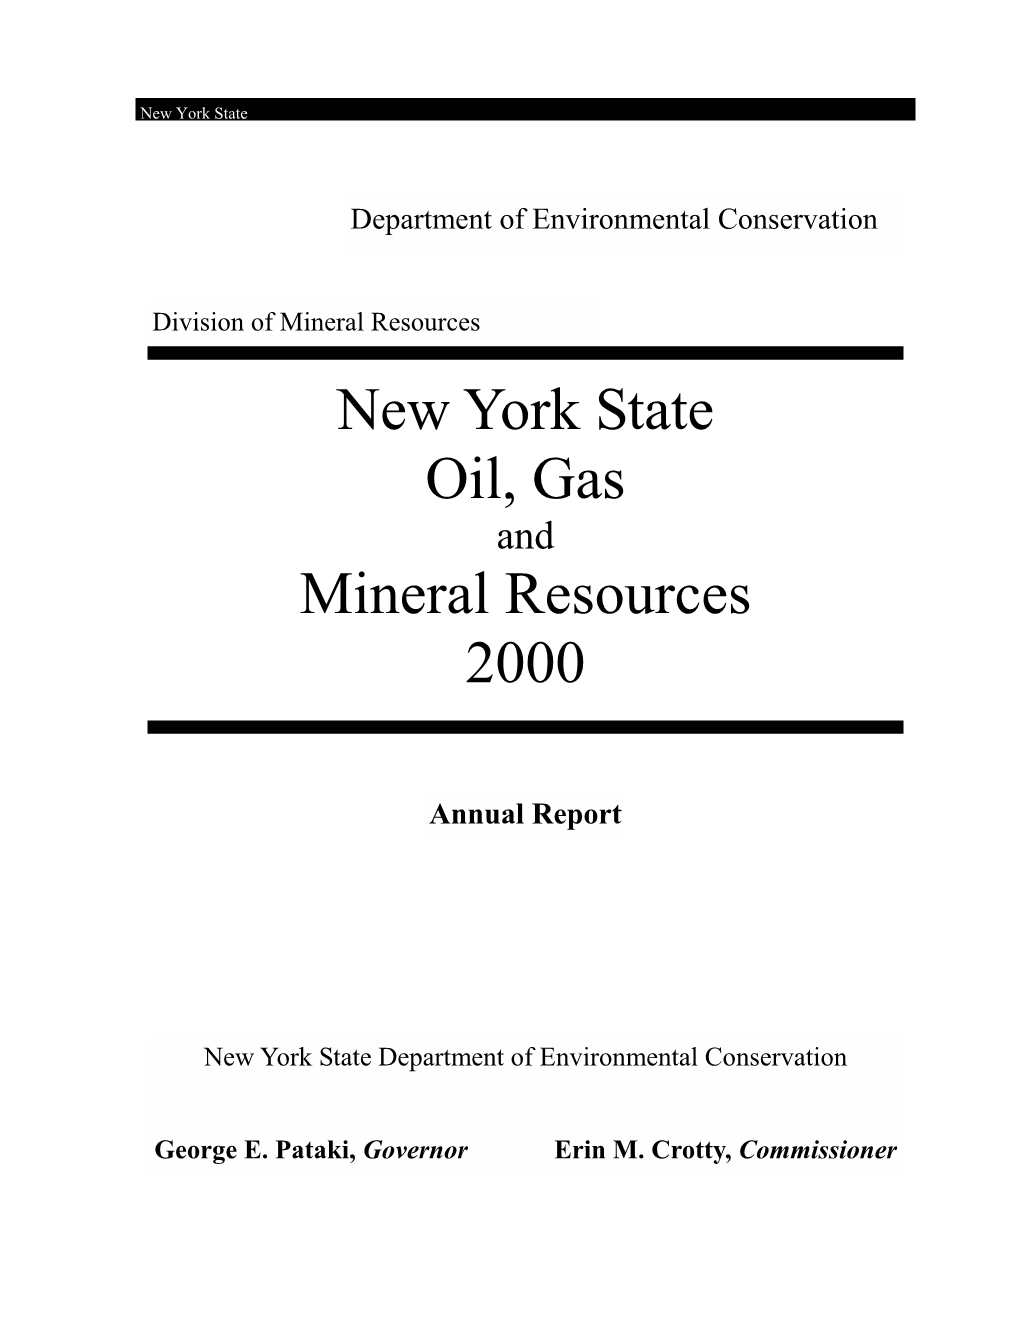 New York State Oil, Gas Mineral Resources 2000